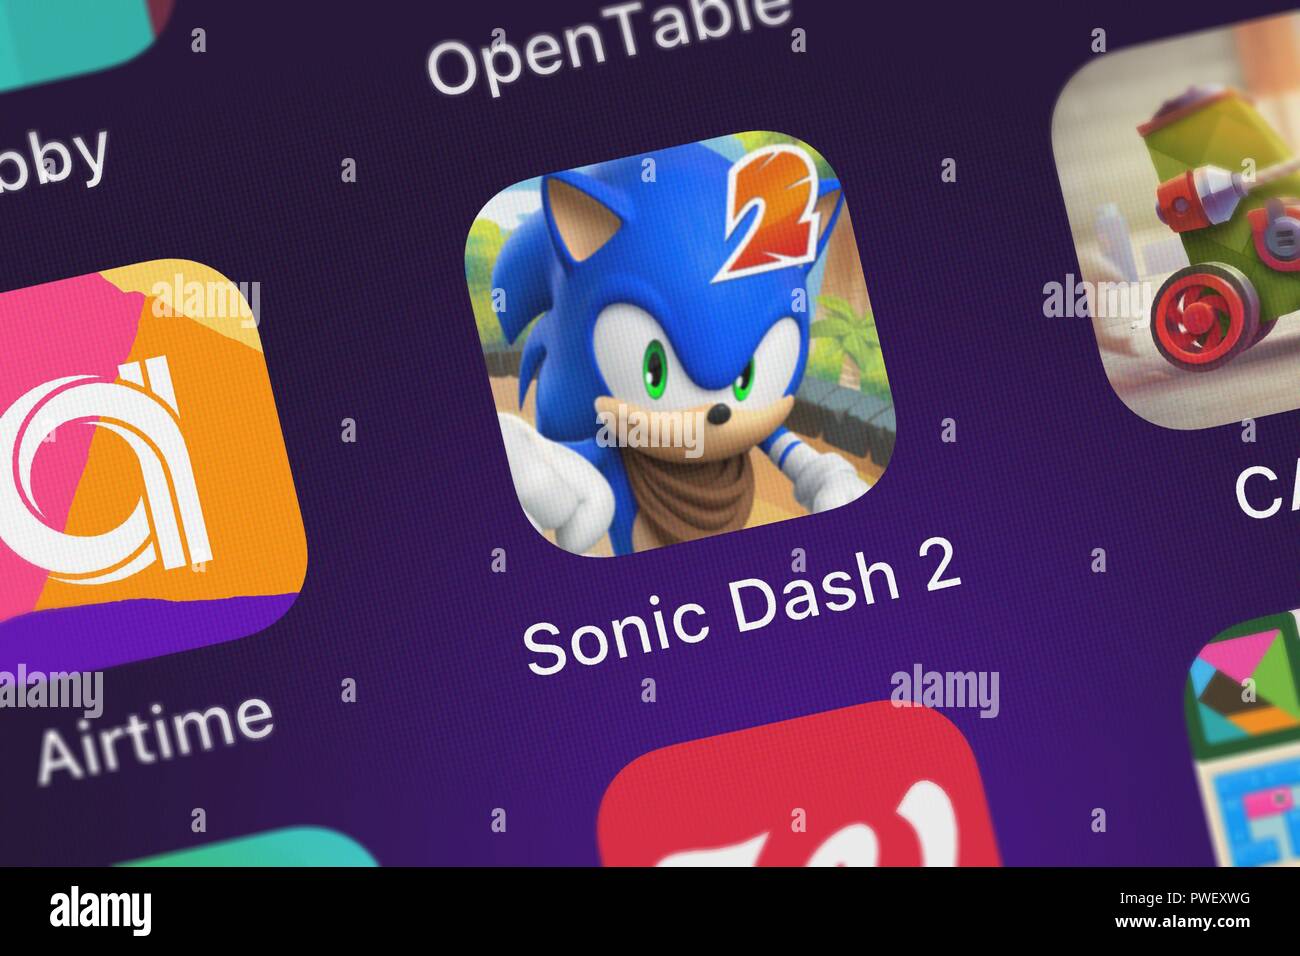 London, United Kingdom - October 15, 2018: Screenshot of the Sonic Dash 2: Sonic Boom mobile app from SEGA icon on an iPhone. Stock Photo